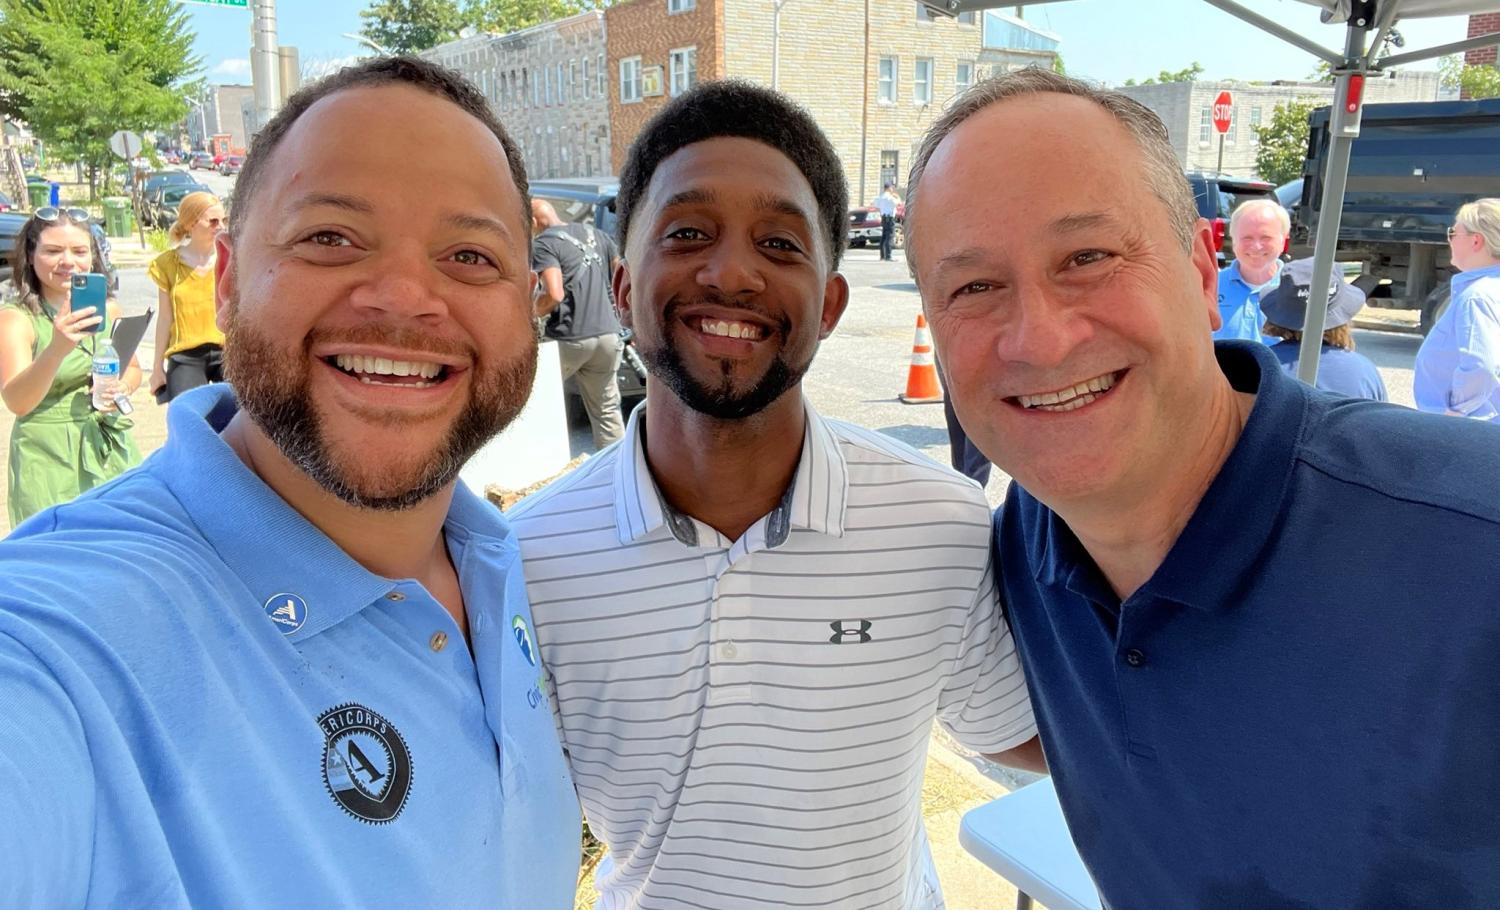 AmeriCorps CEO Michael D. Smith, Second Gentleman Douglas Emhoff, and Baltimore Mayor Brandon Scott pose for a 'selfie' during their service project with City Works in Baltimore.